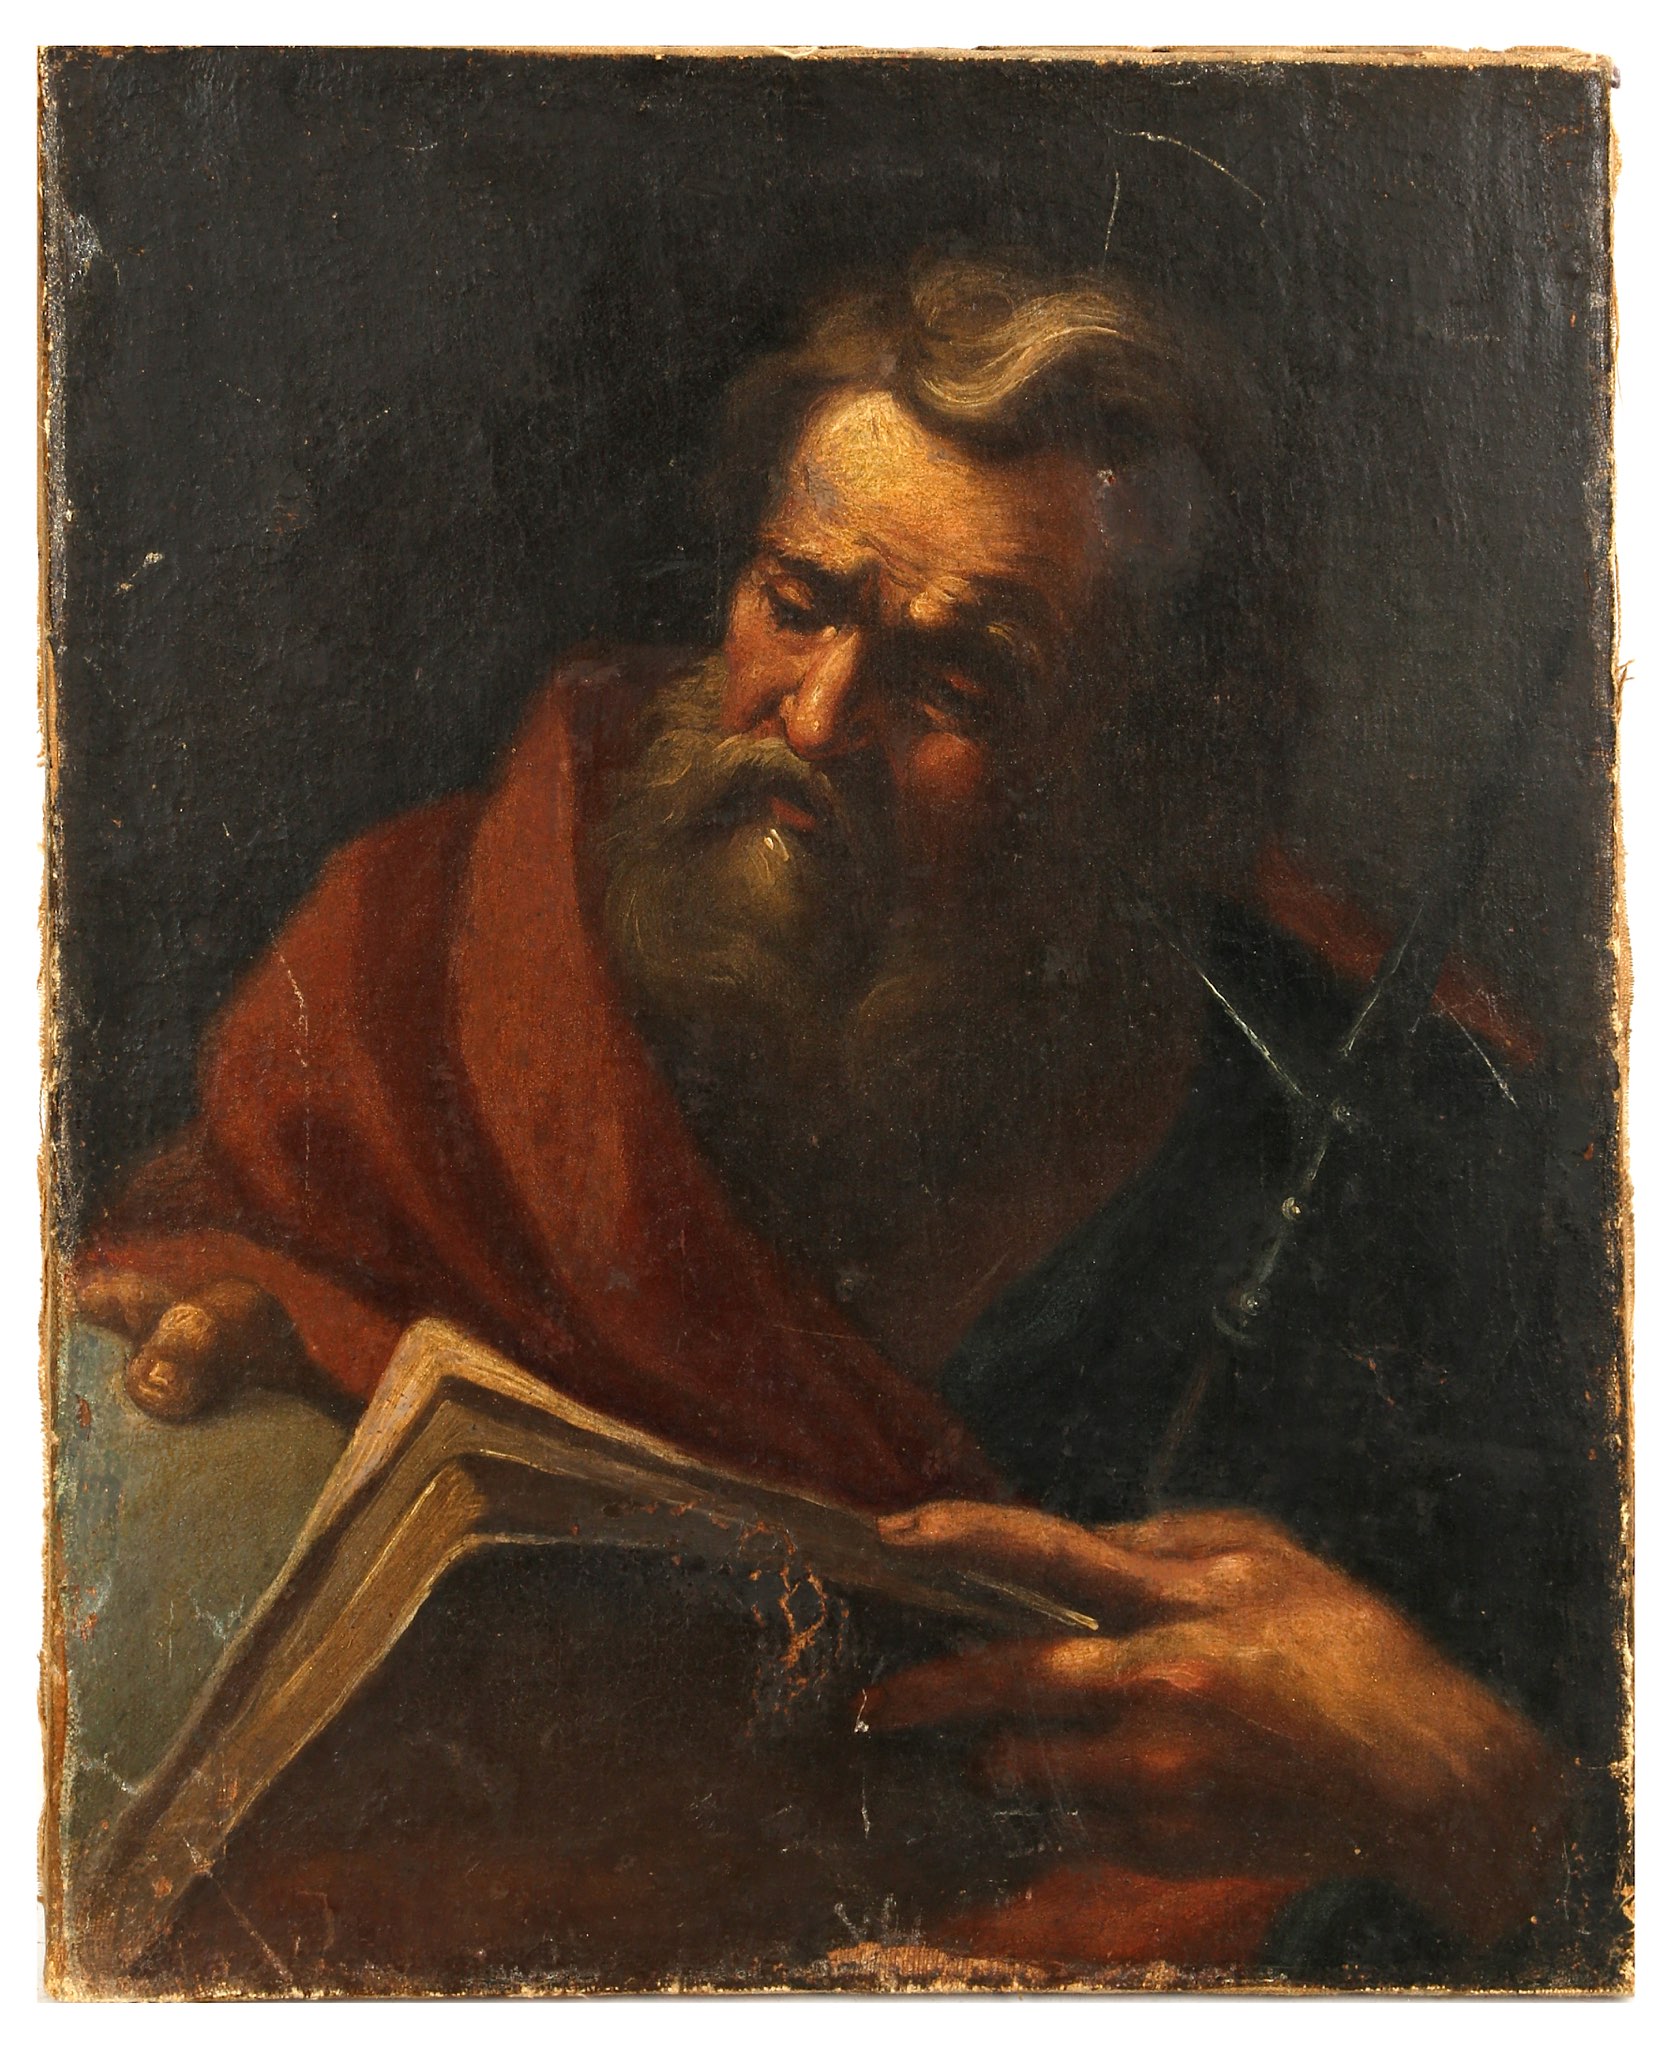 Late 17th century/early 18th century Italian School, St Peter depicted with bible and crucifix,